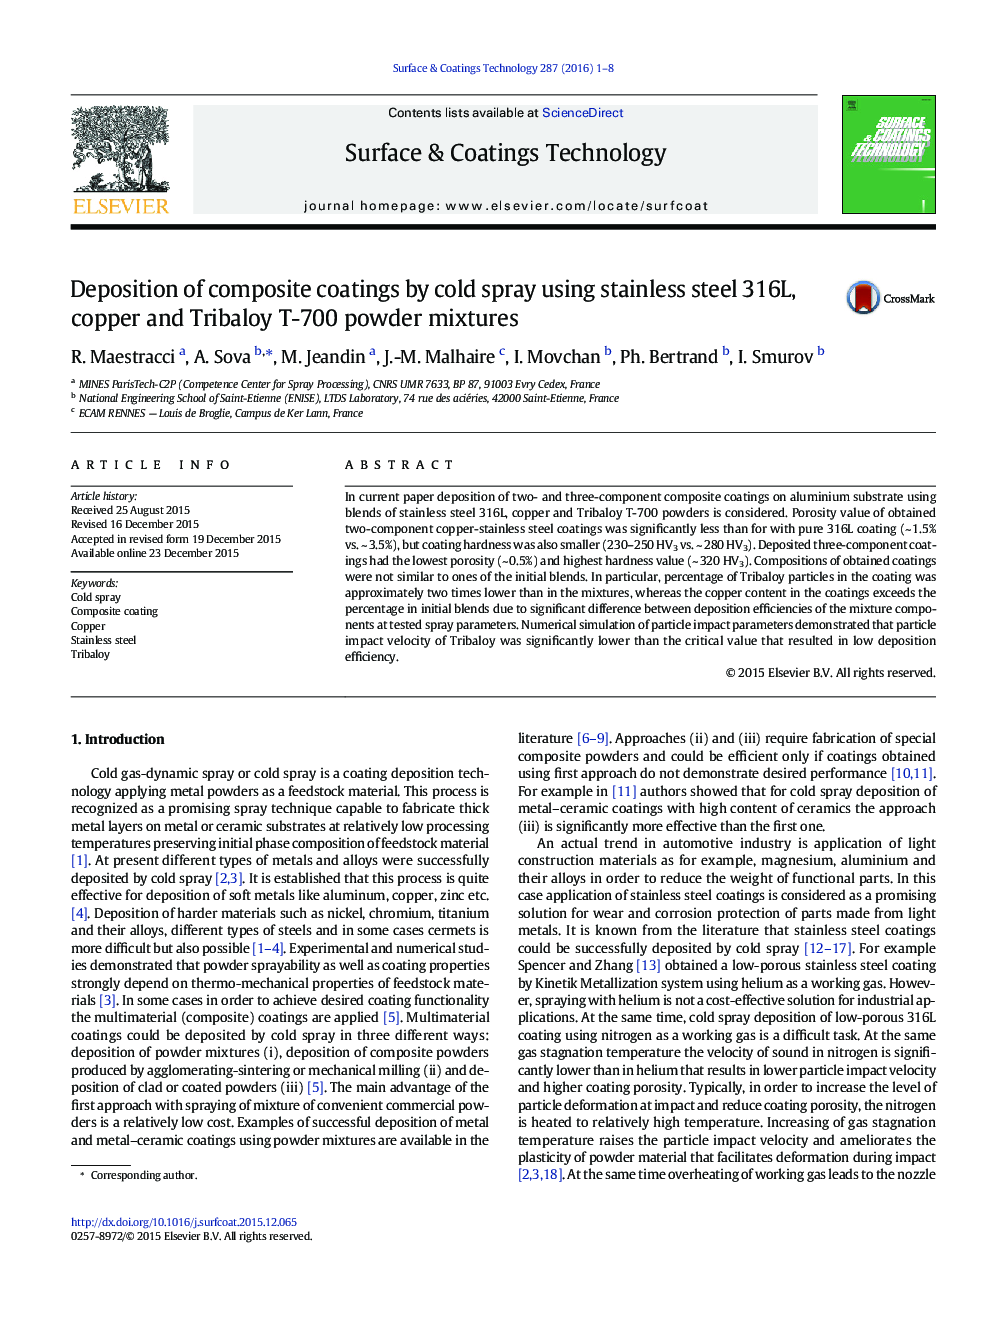 Deposition of composite coatings by cold spray using stainless steel 316L, copper and Tribaloy T-700 powder mixtures